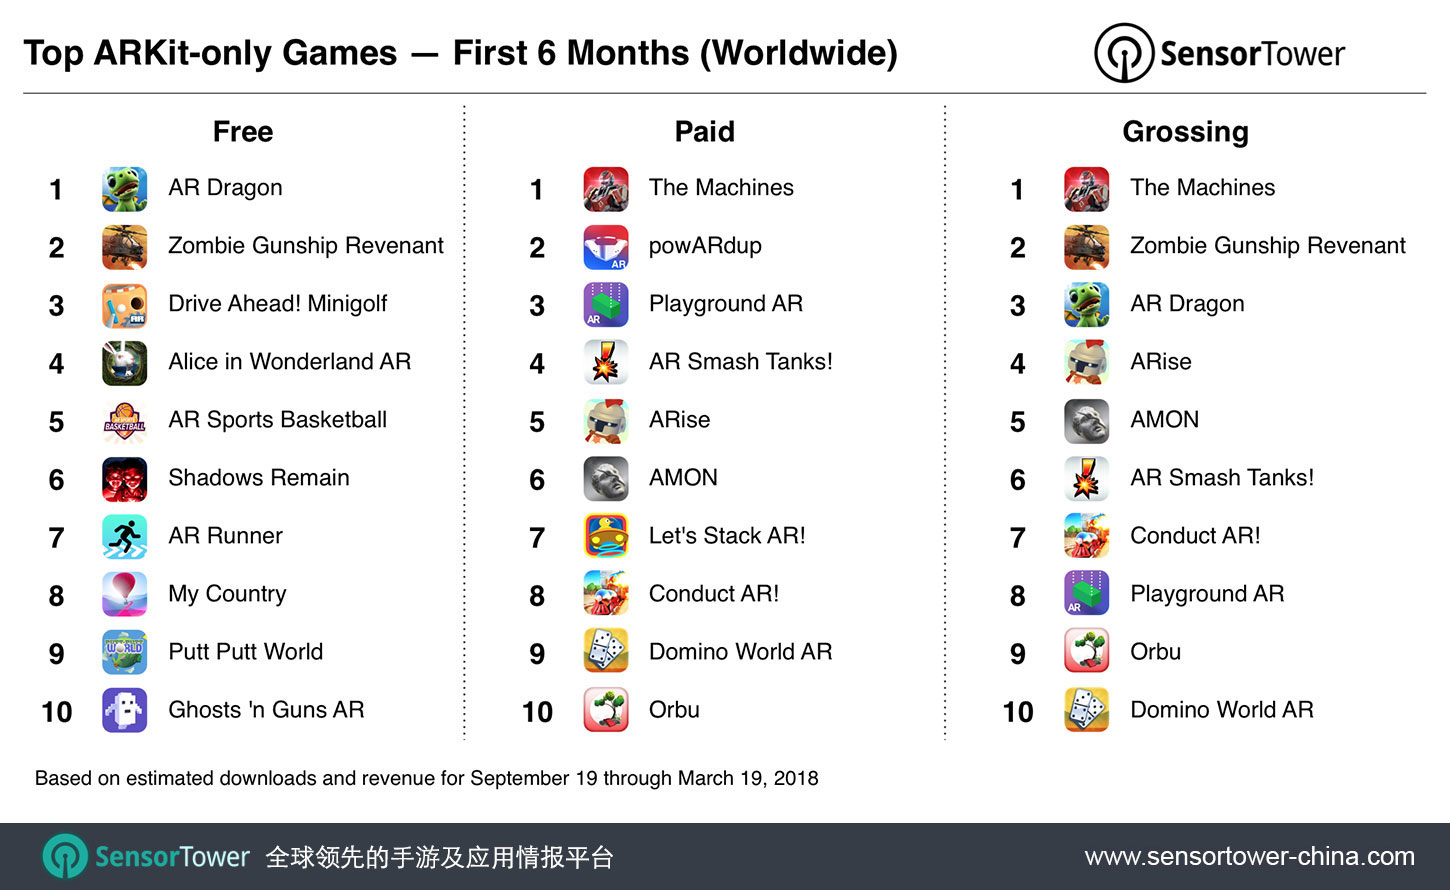 Ranking of top free, paid, and grossing ARKit mobile games overall for September 19, 2017 to March 19, 2018 CN